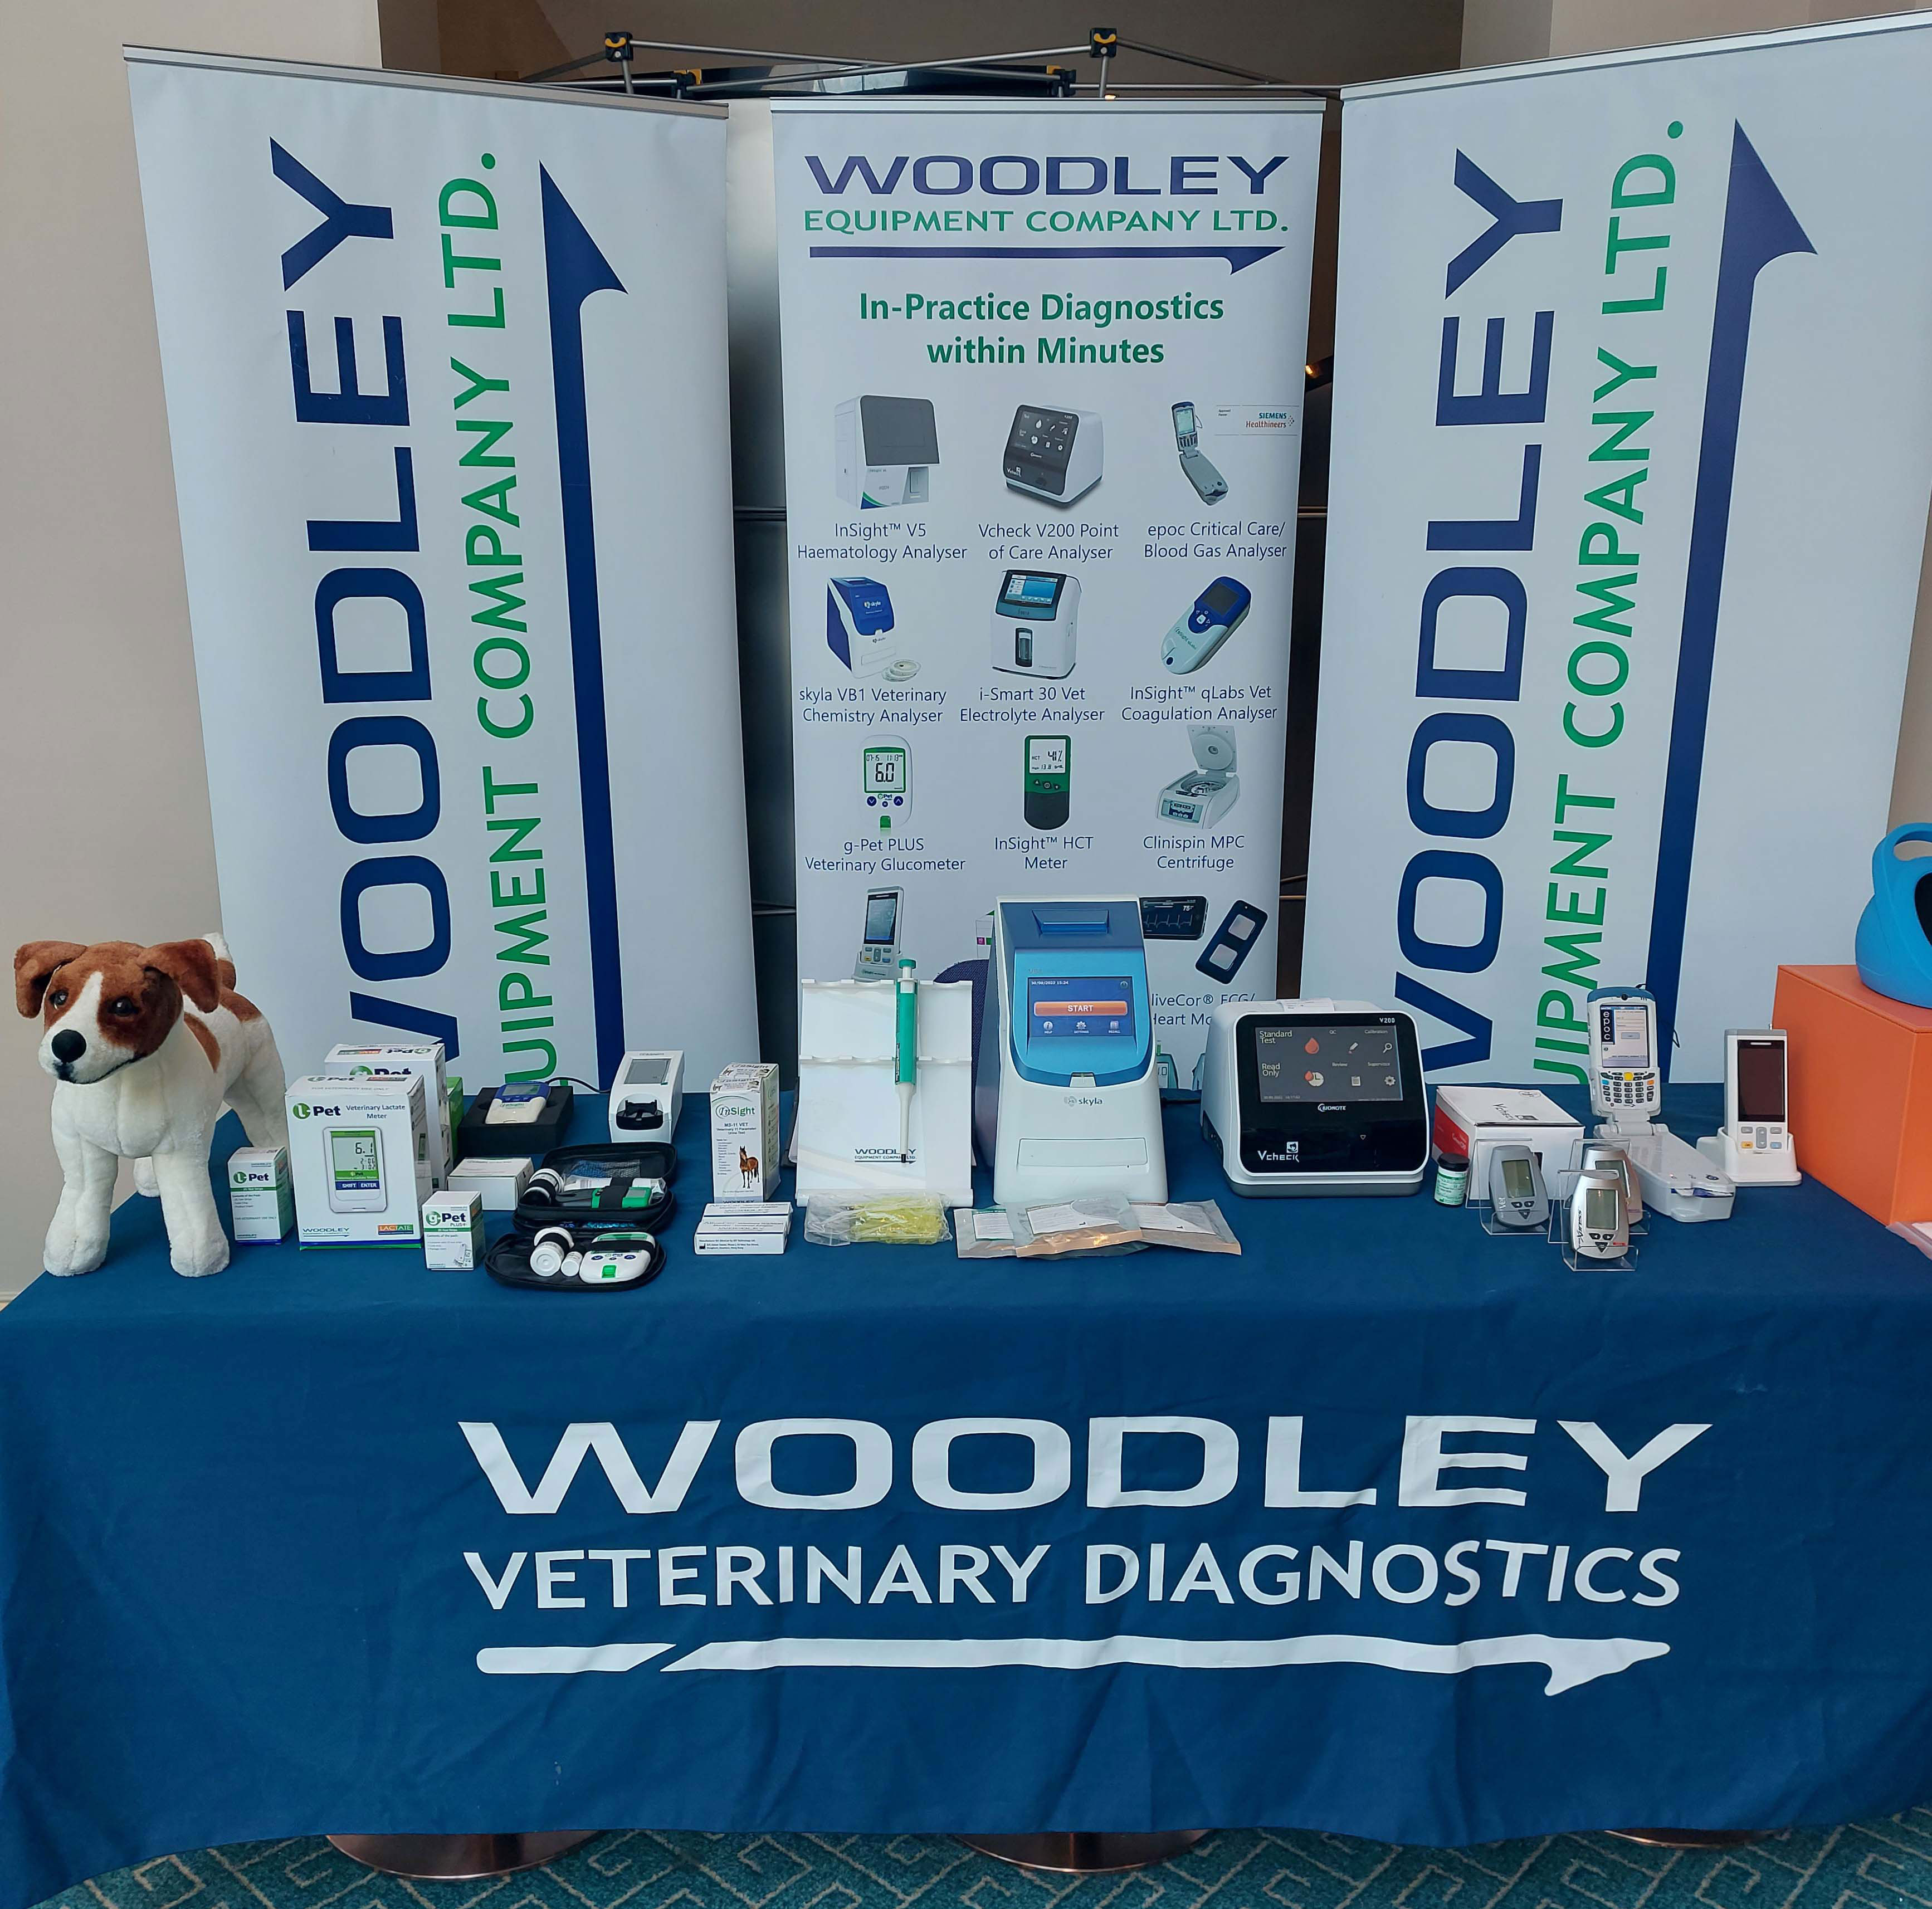 Woodley are Exhibiting at the AVSPNI Autumn Conference